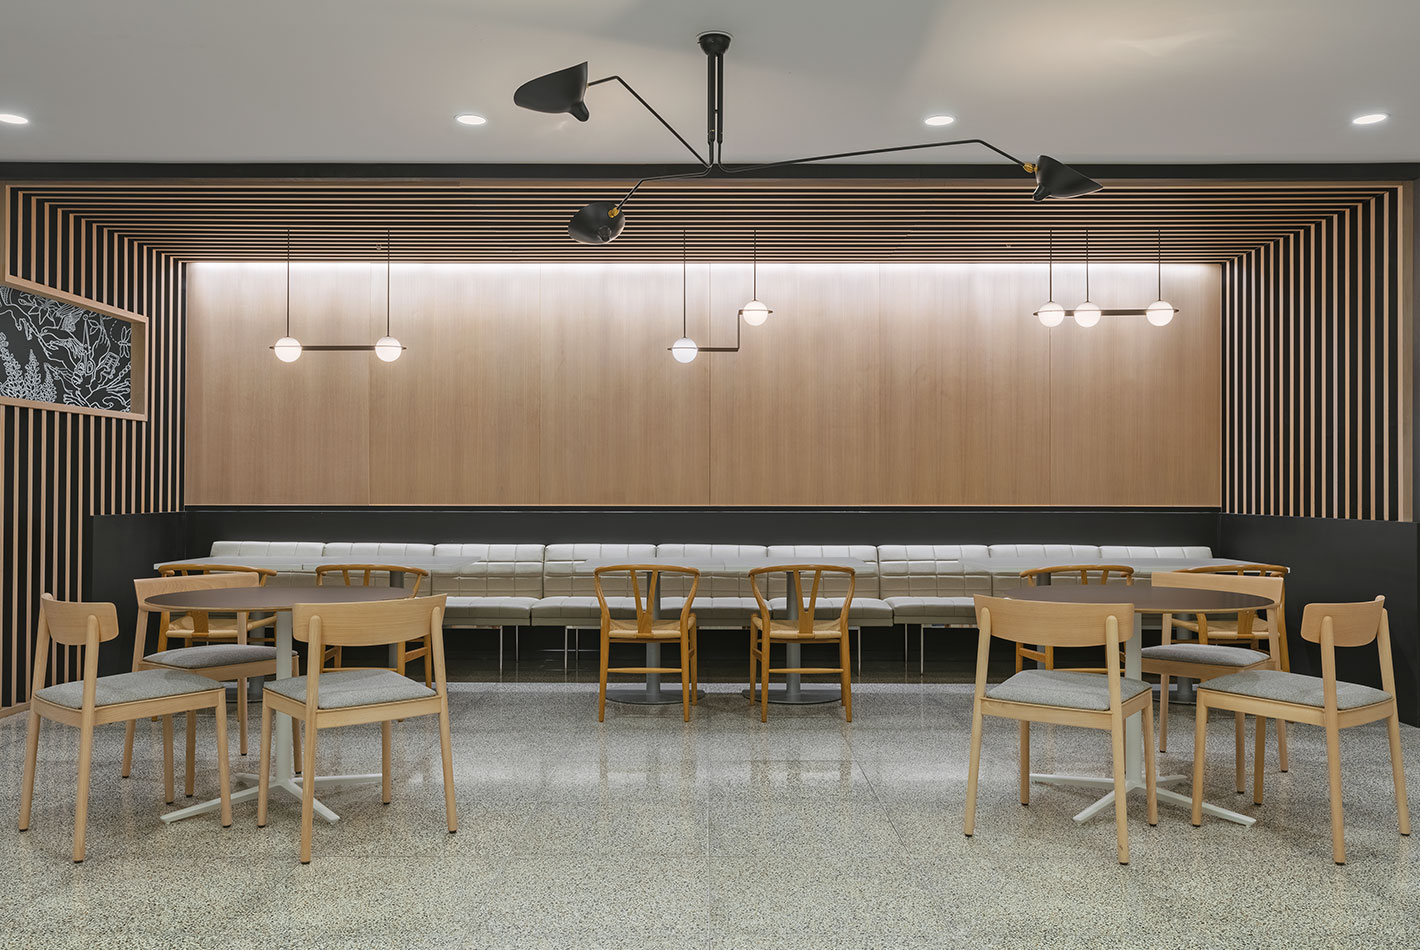 Sculptural light fixtures illuminate a cafe seating area at J Crew Headquarters. A long banquette with tables and chairs feature on a terrazzo floor. Wood paneling covers the walls.